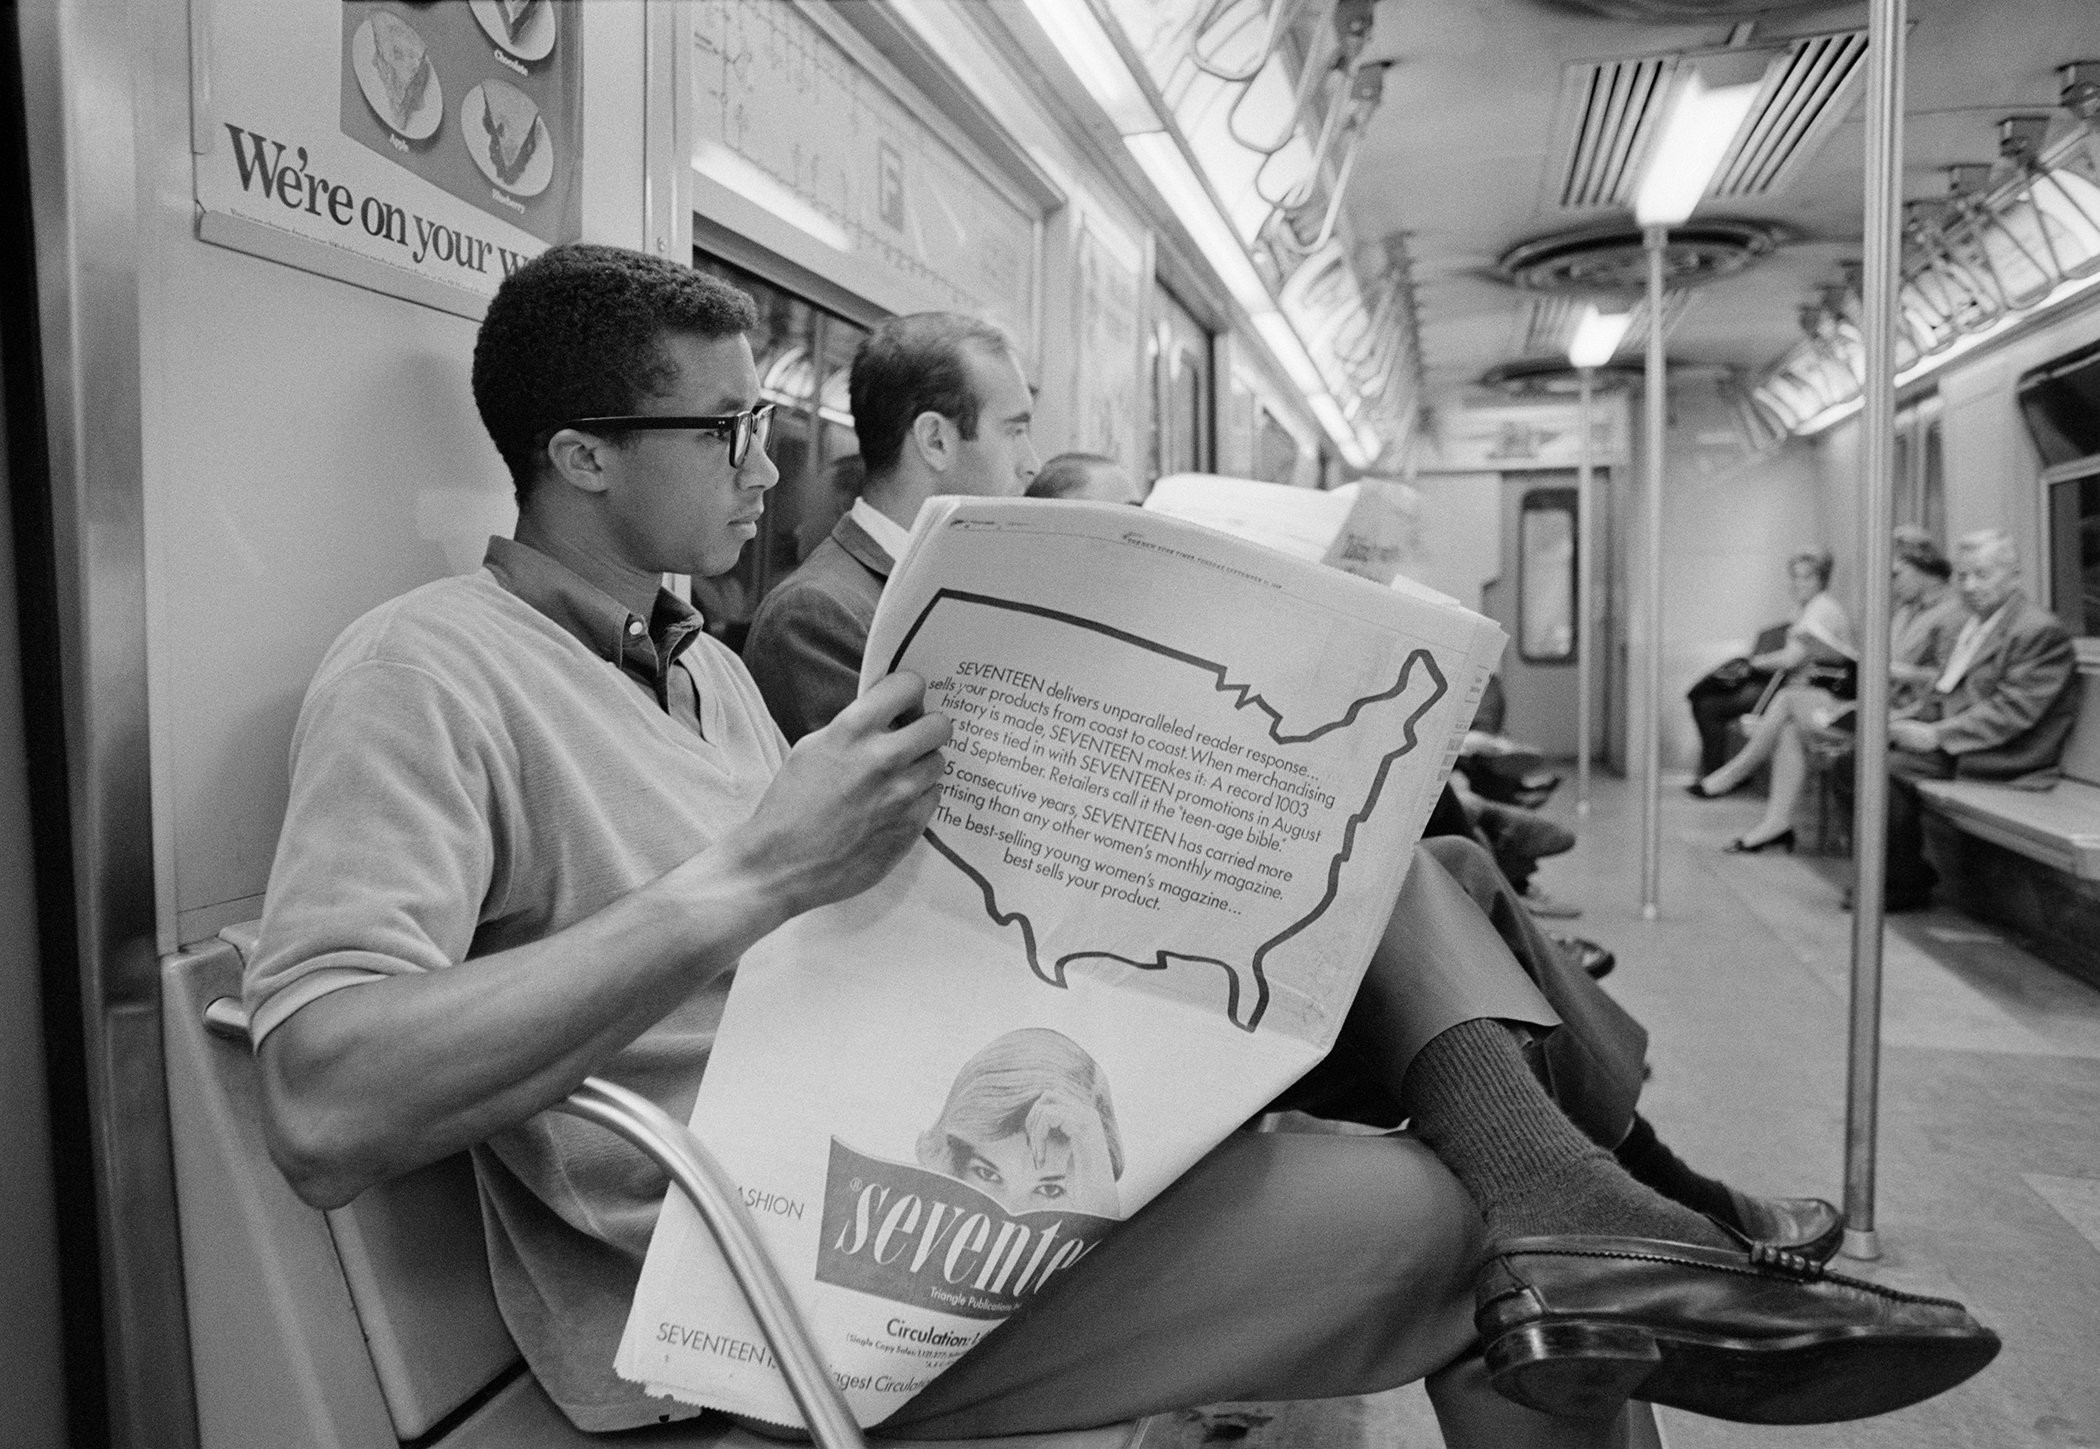 Arthus Ashe takes the New York City subway, unrecognized the day after winning the US Open Men's Singles Championship. September 10, 1968. Photo by John G. Zimmerman.